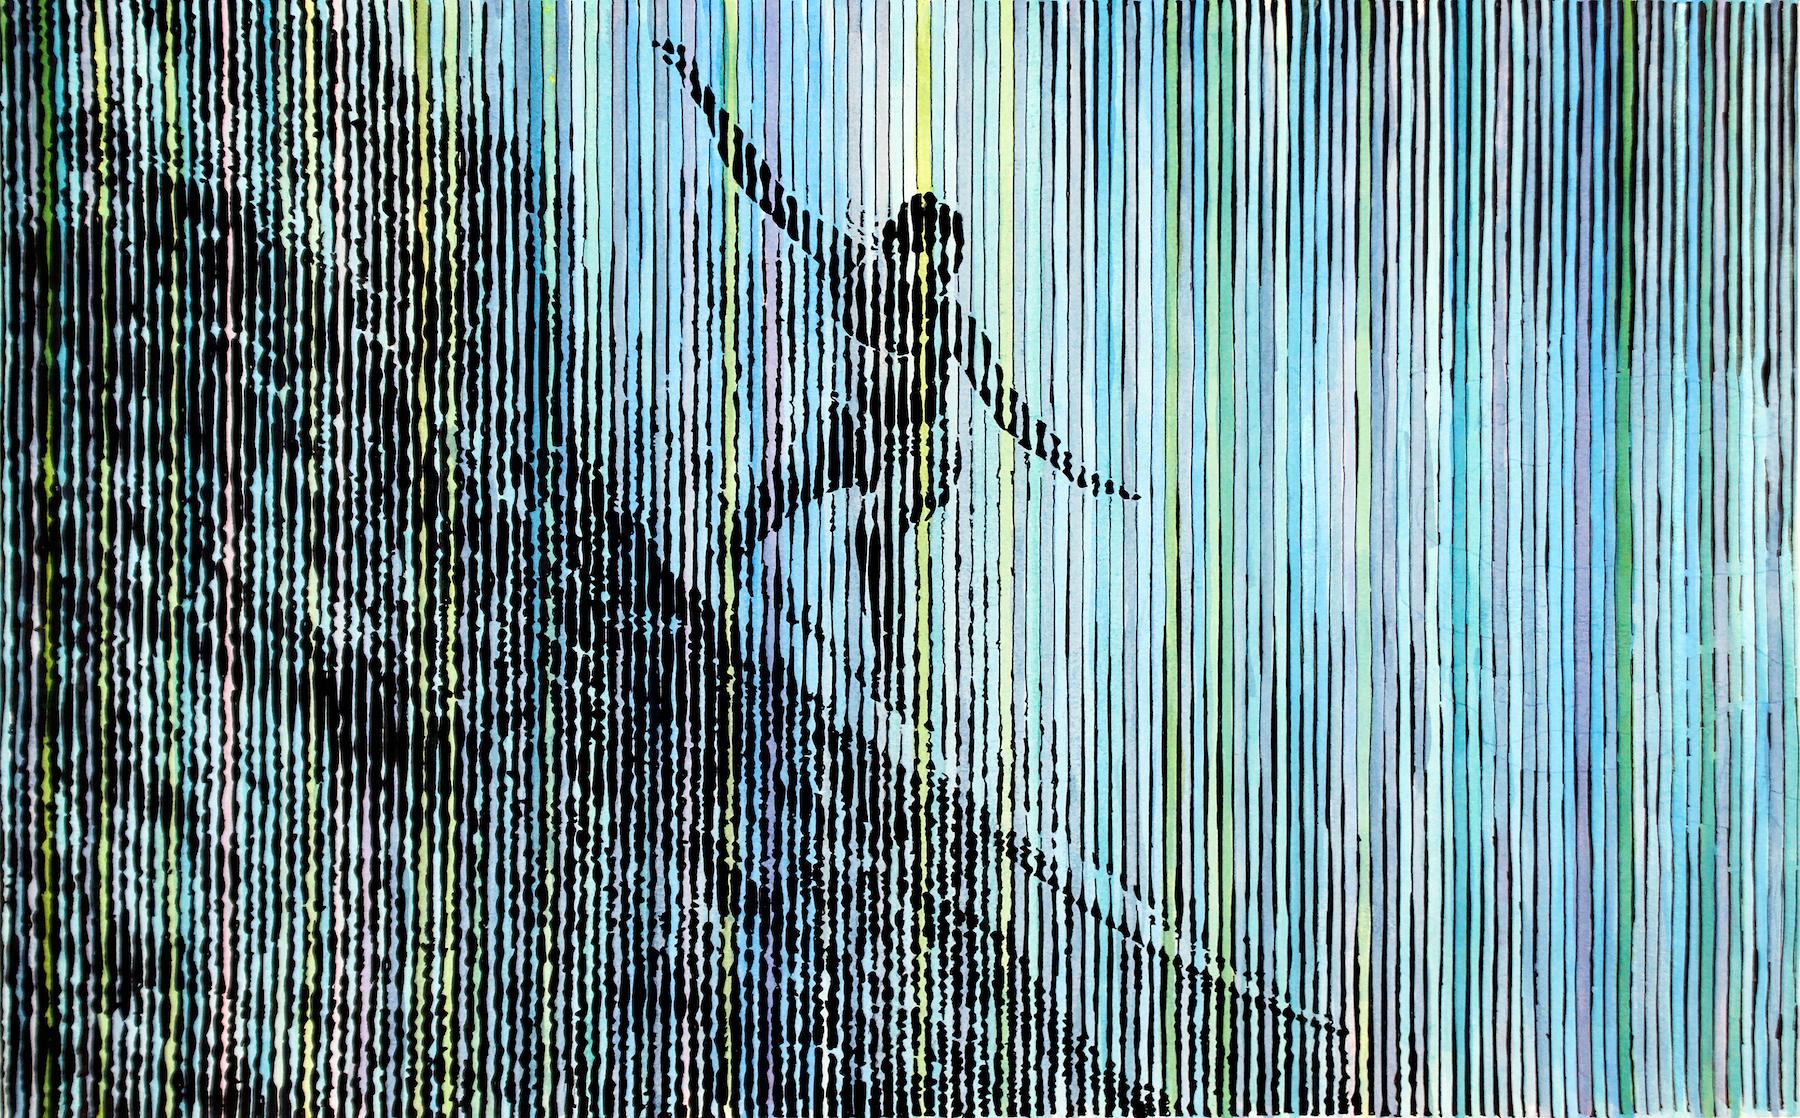 Charles Buckley Figurative Art - The Big Wave, blue and black work on paper, woman surfing, stripes